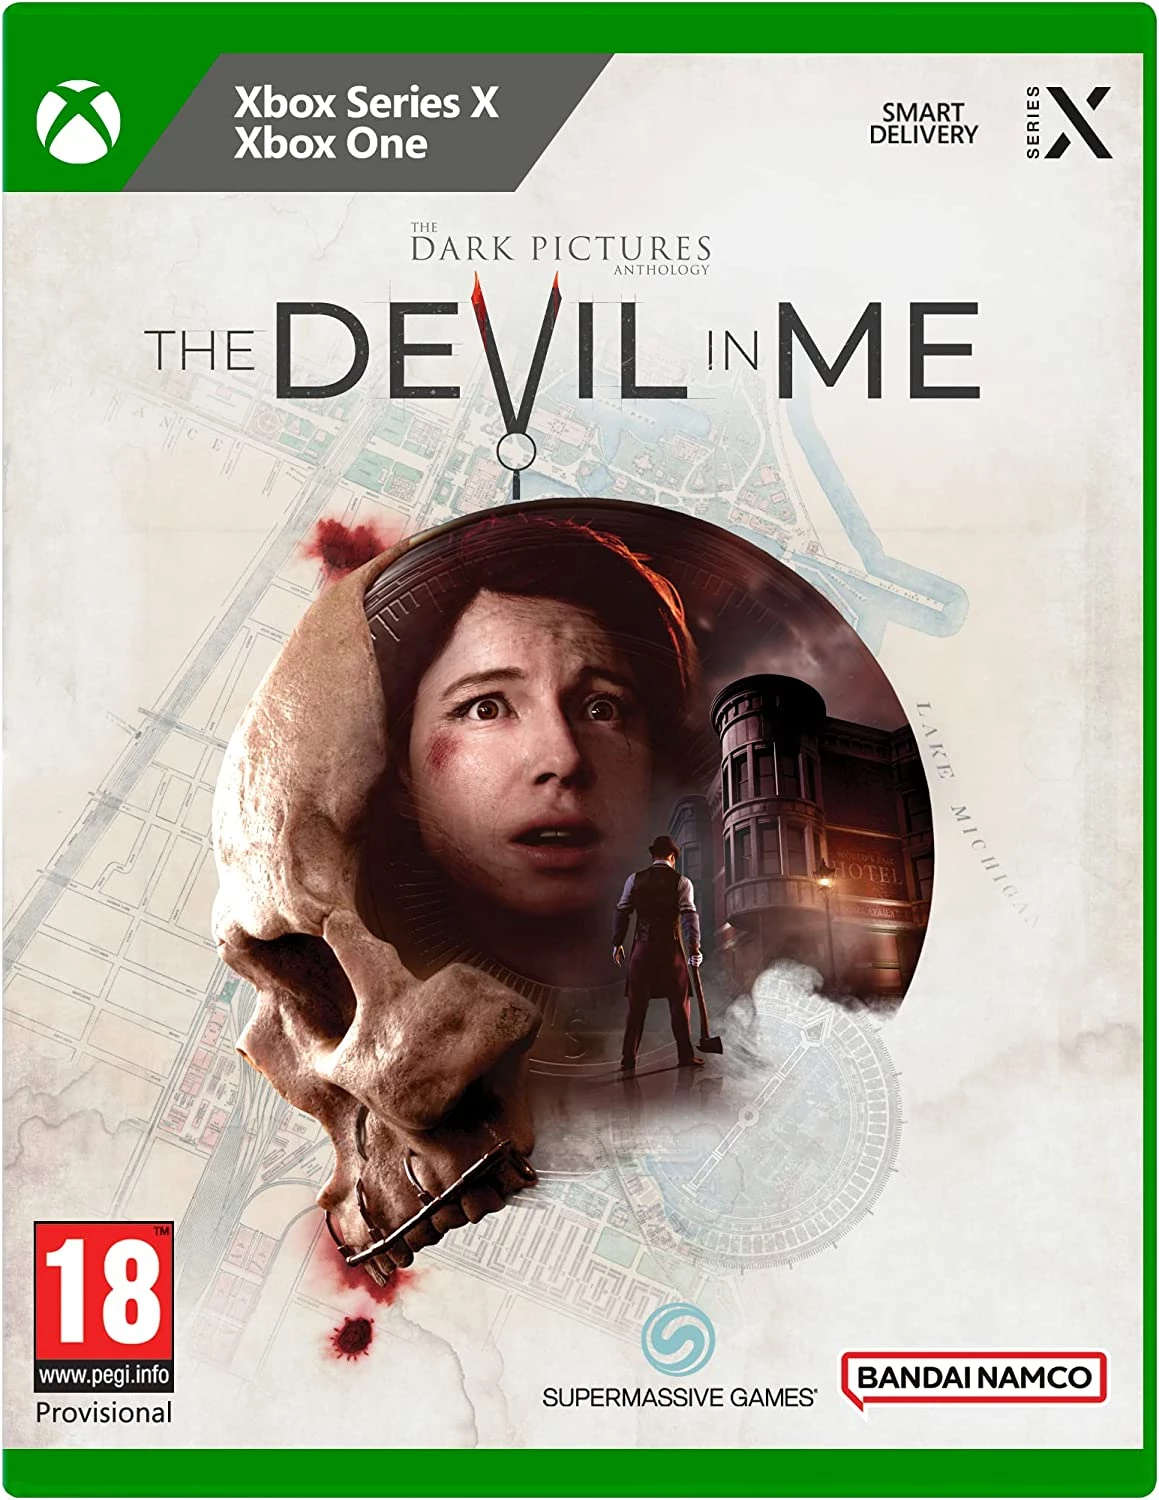 The Dark Pictures Anthology: The Devil in Me (Xbox One), Supermassive Games